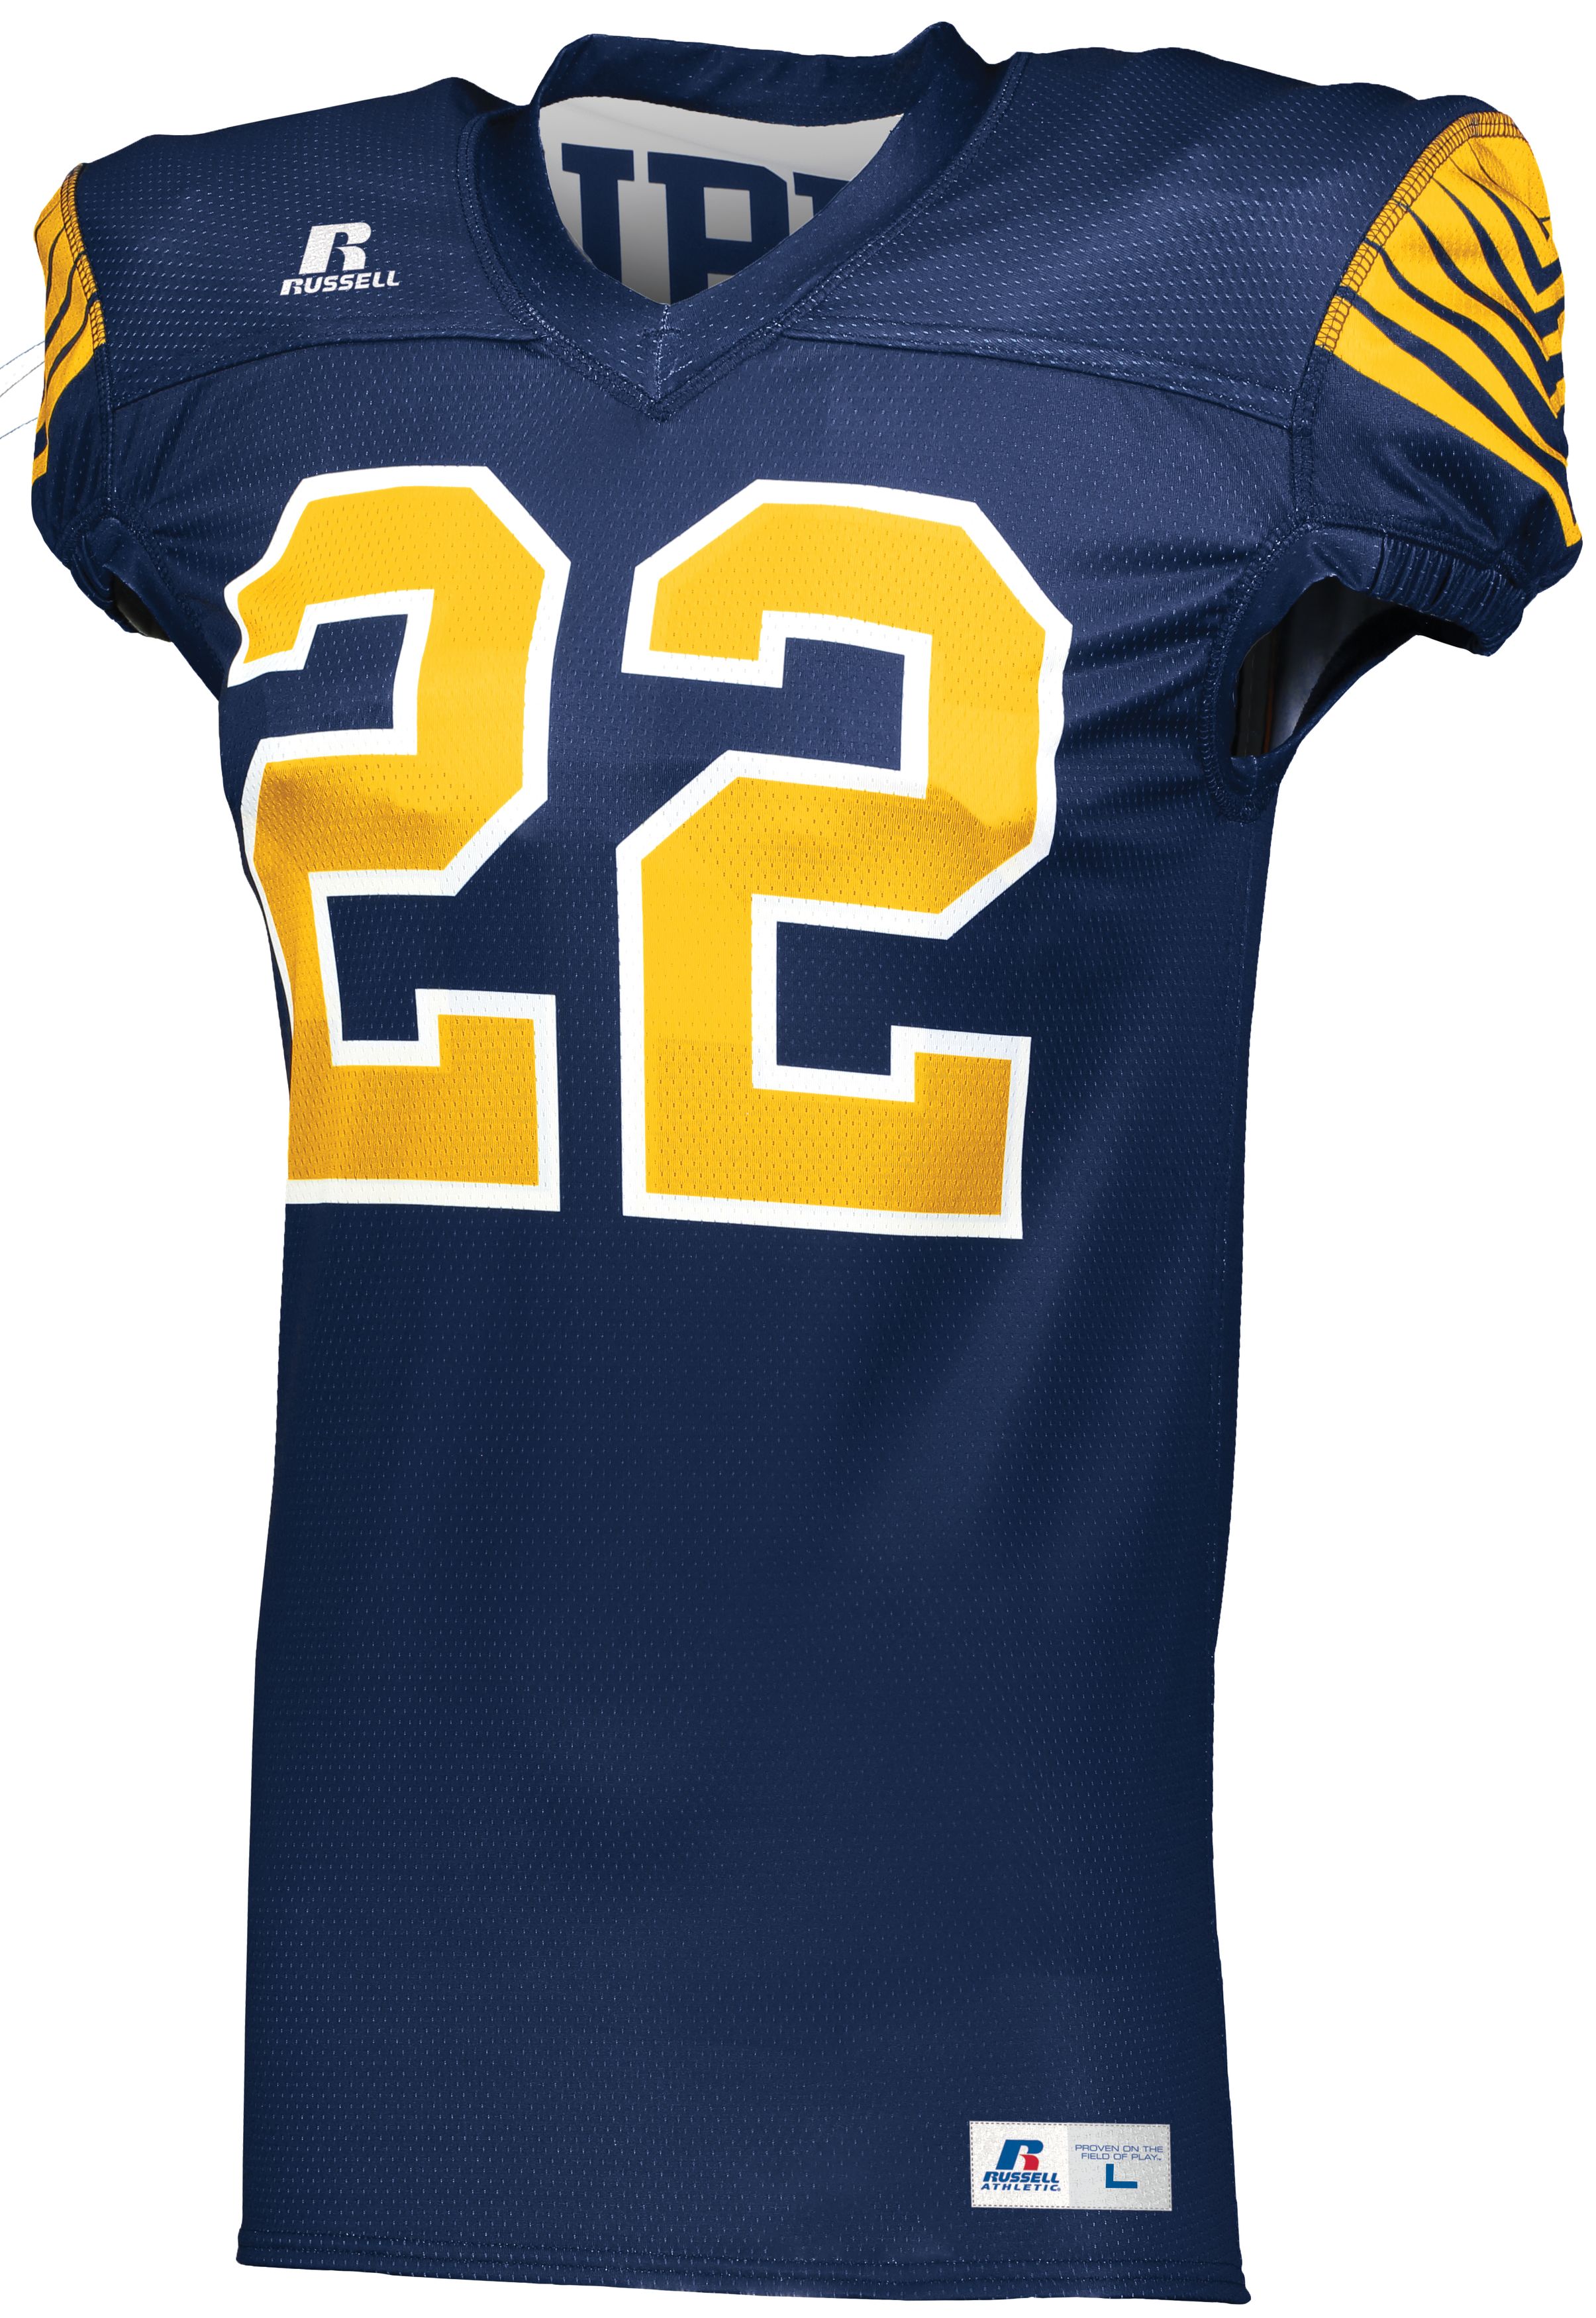 Russell Athletic Football Jersey 